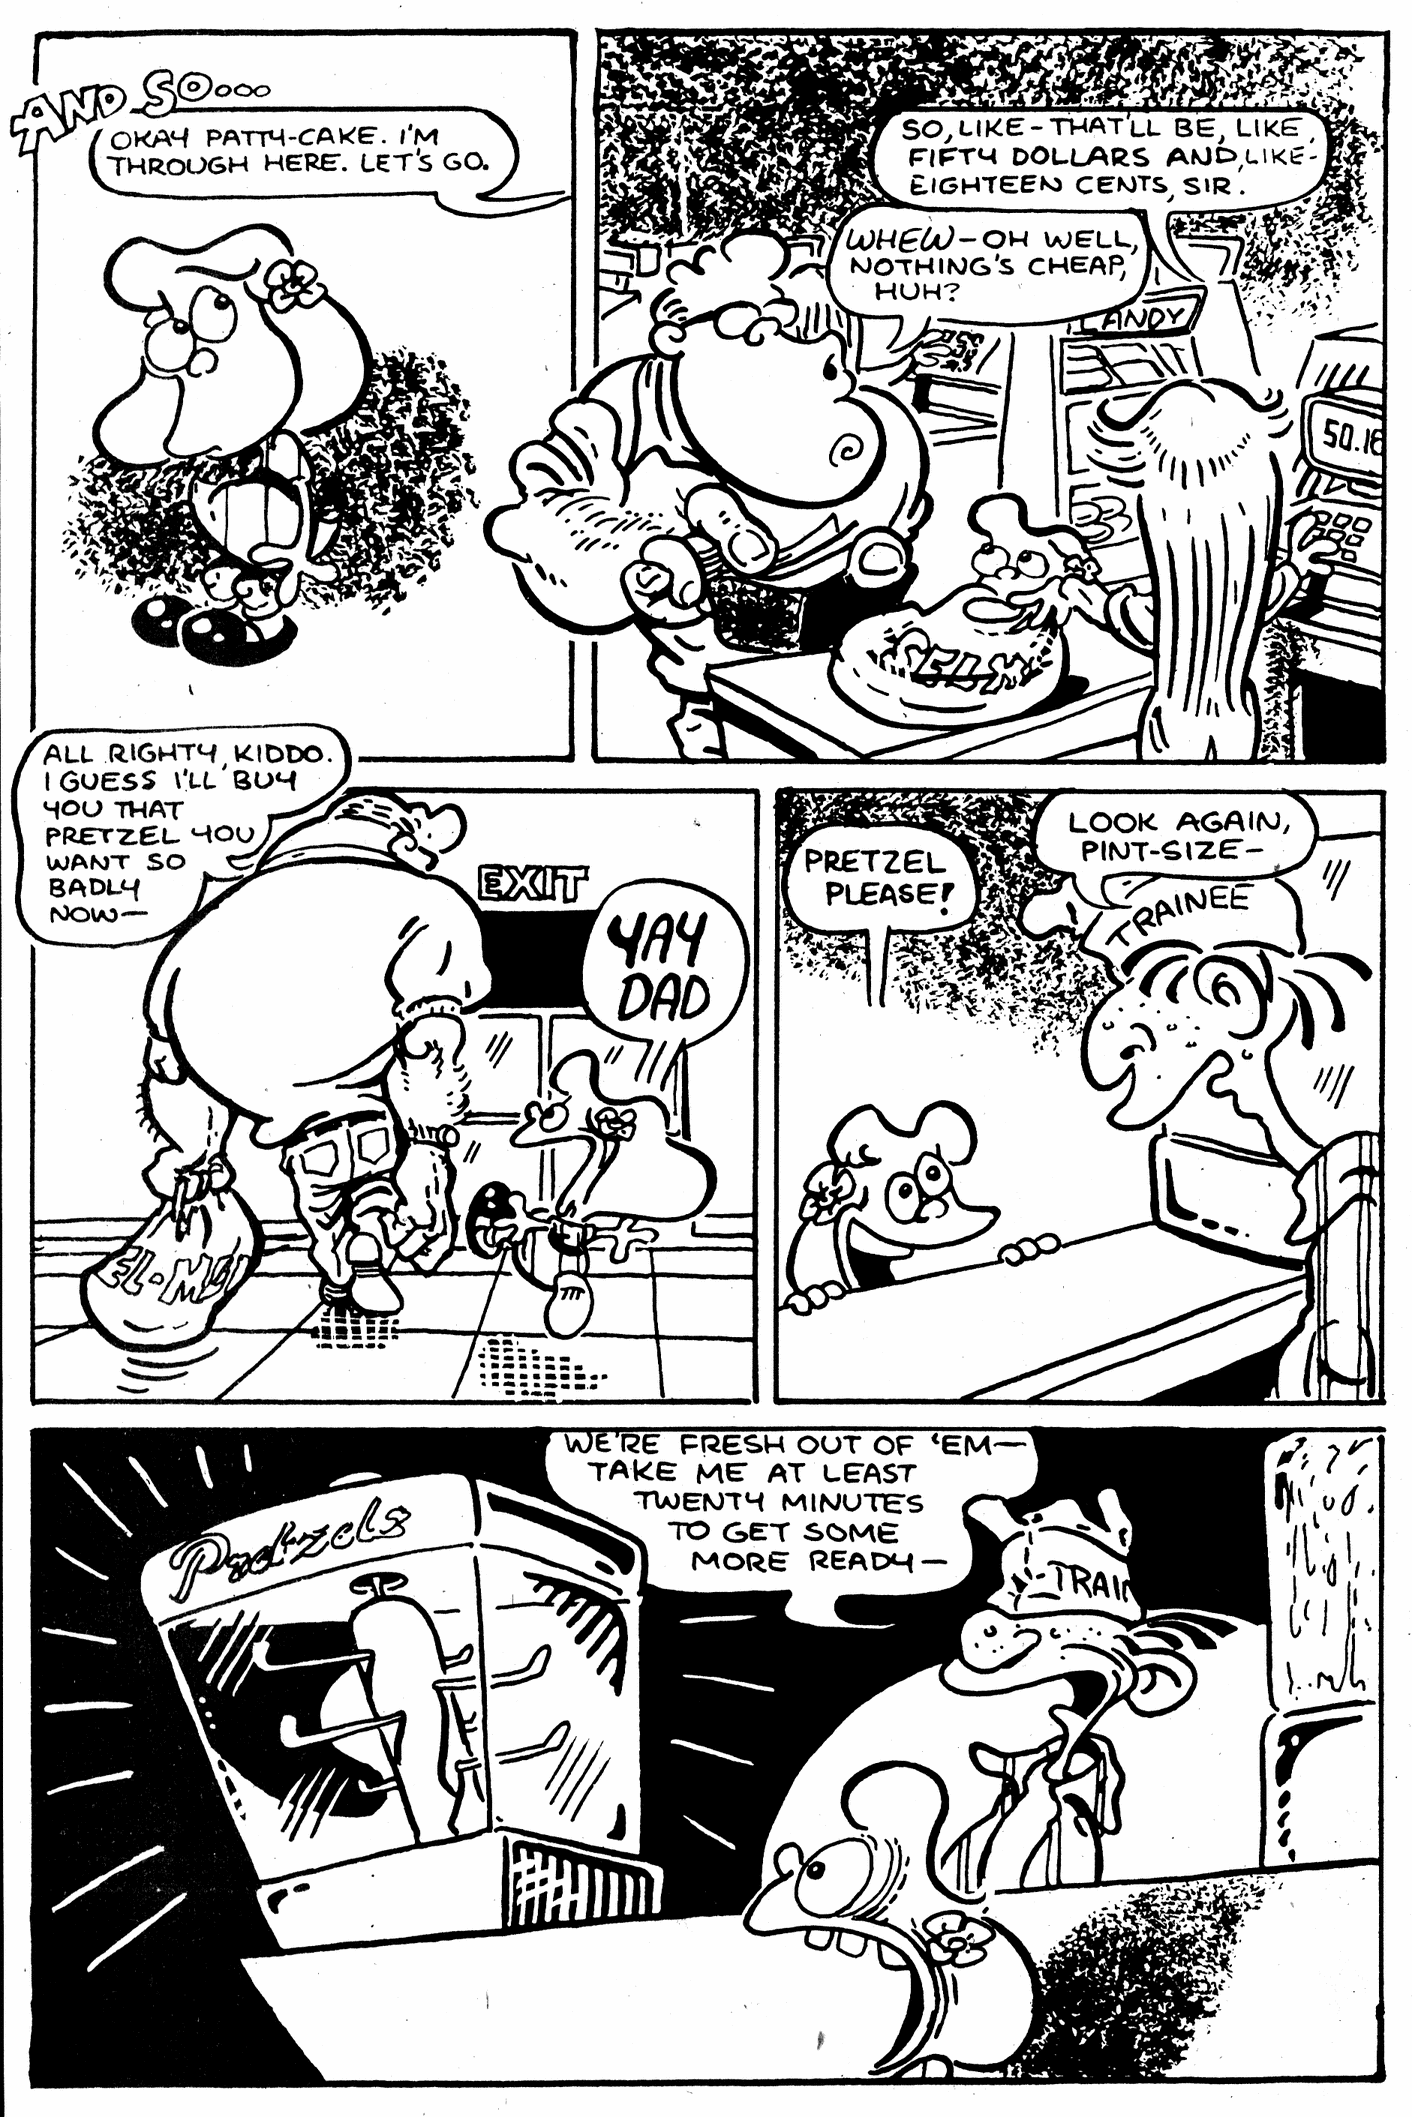 Read online Patty Cake comic -  Issue #2 - 30